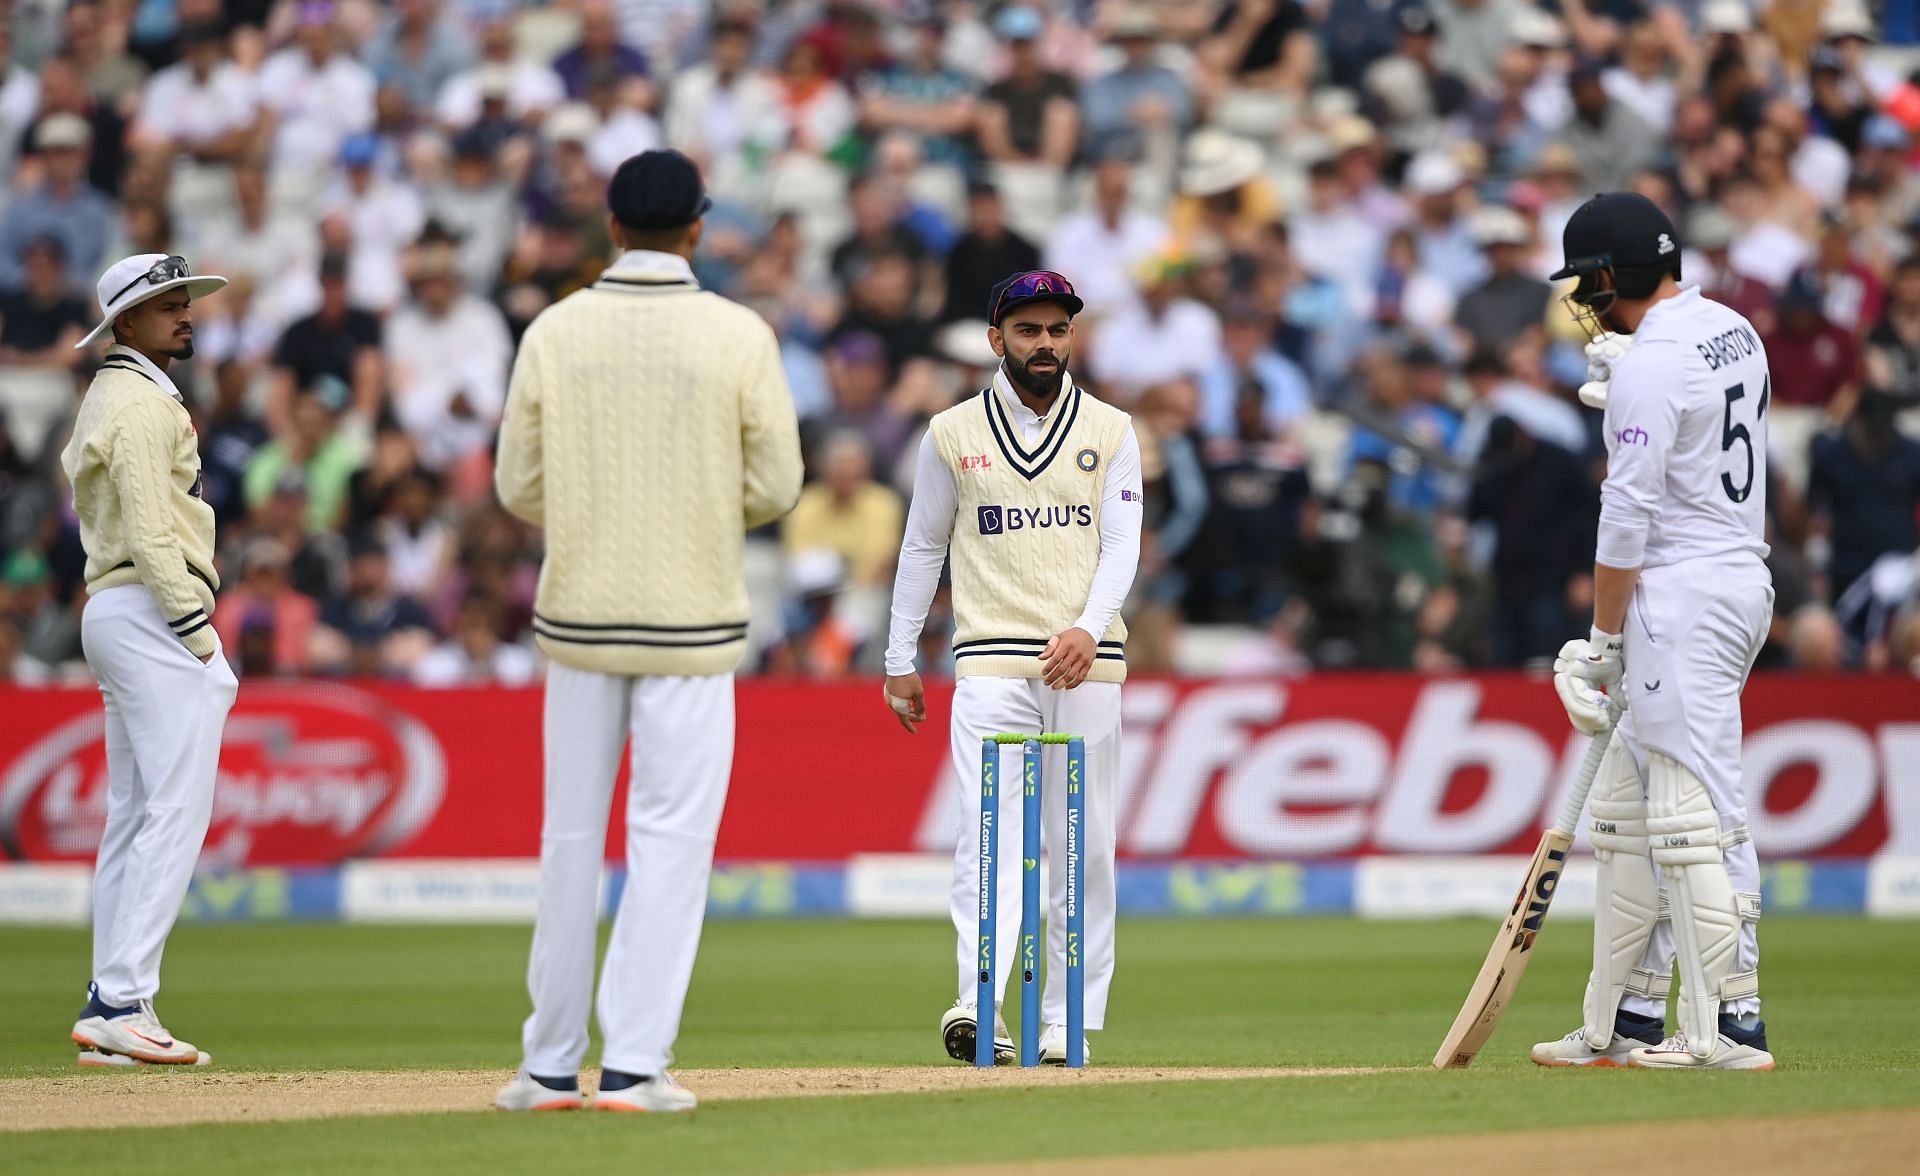 Jonny Bairstow and Virat Kohli engaged in a verbal tussle. (Credits: Getty)